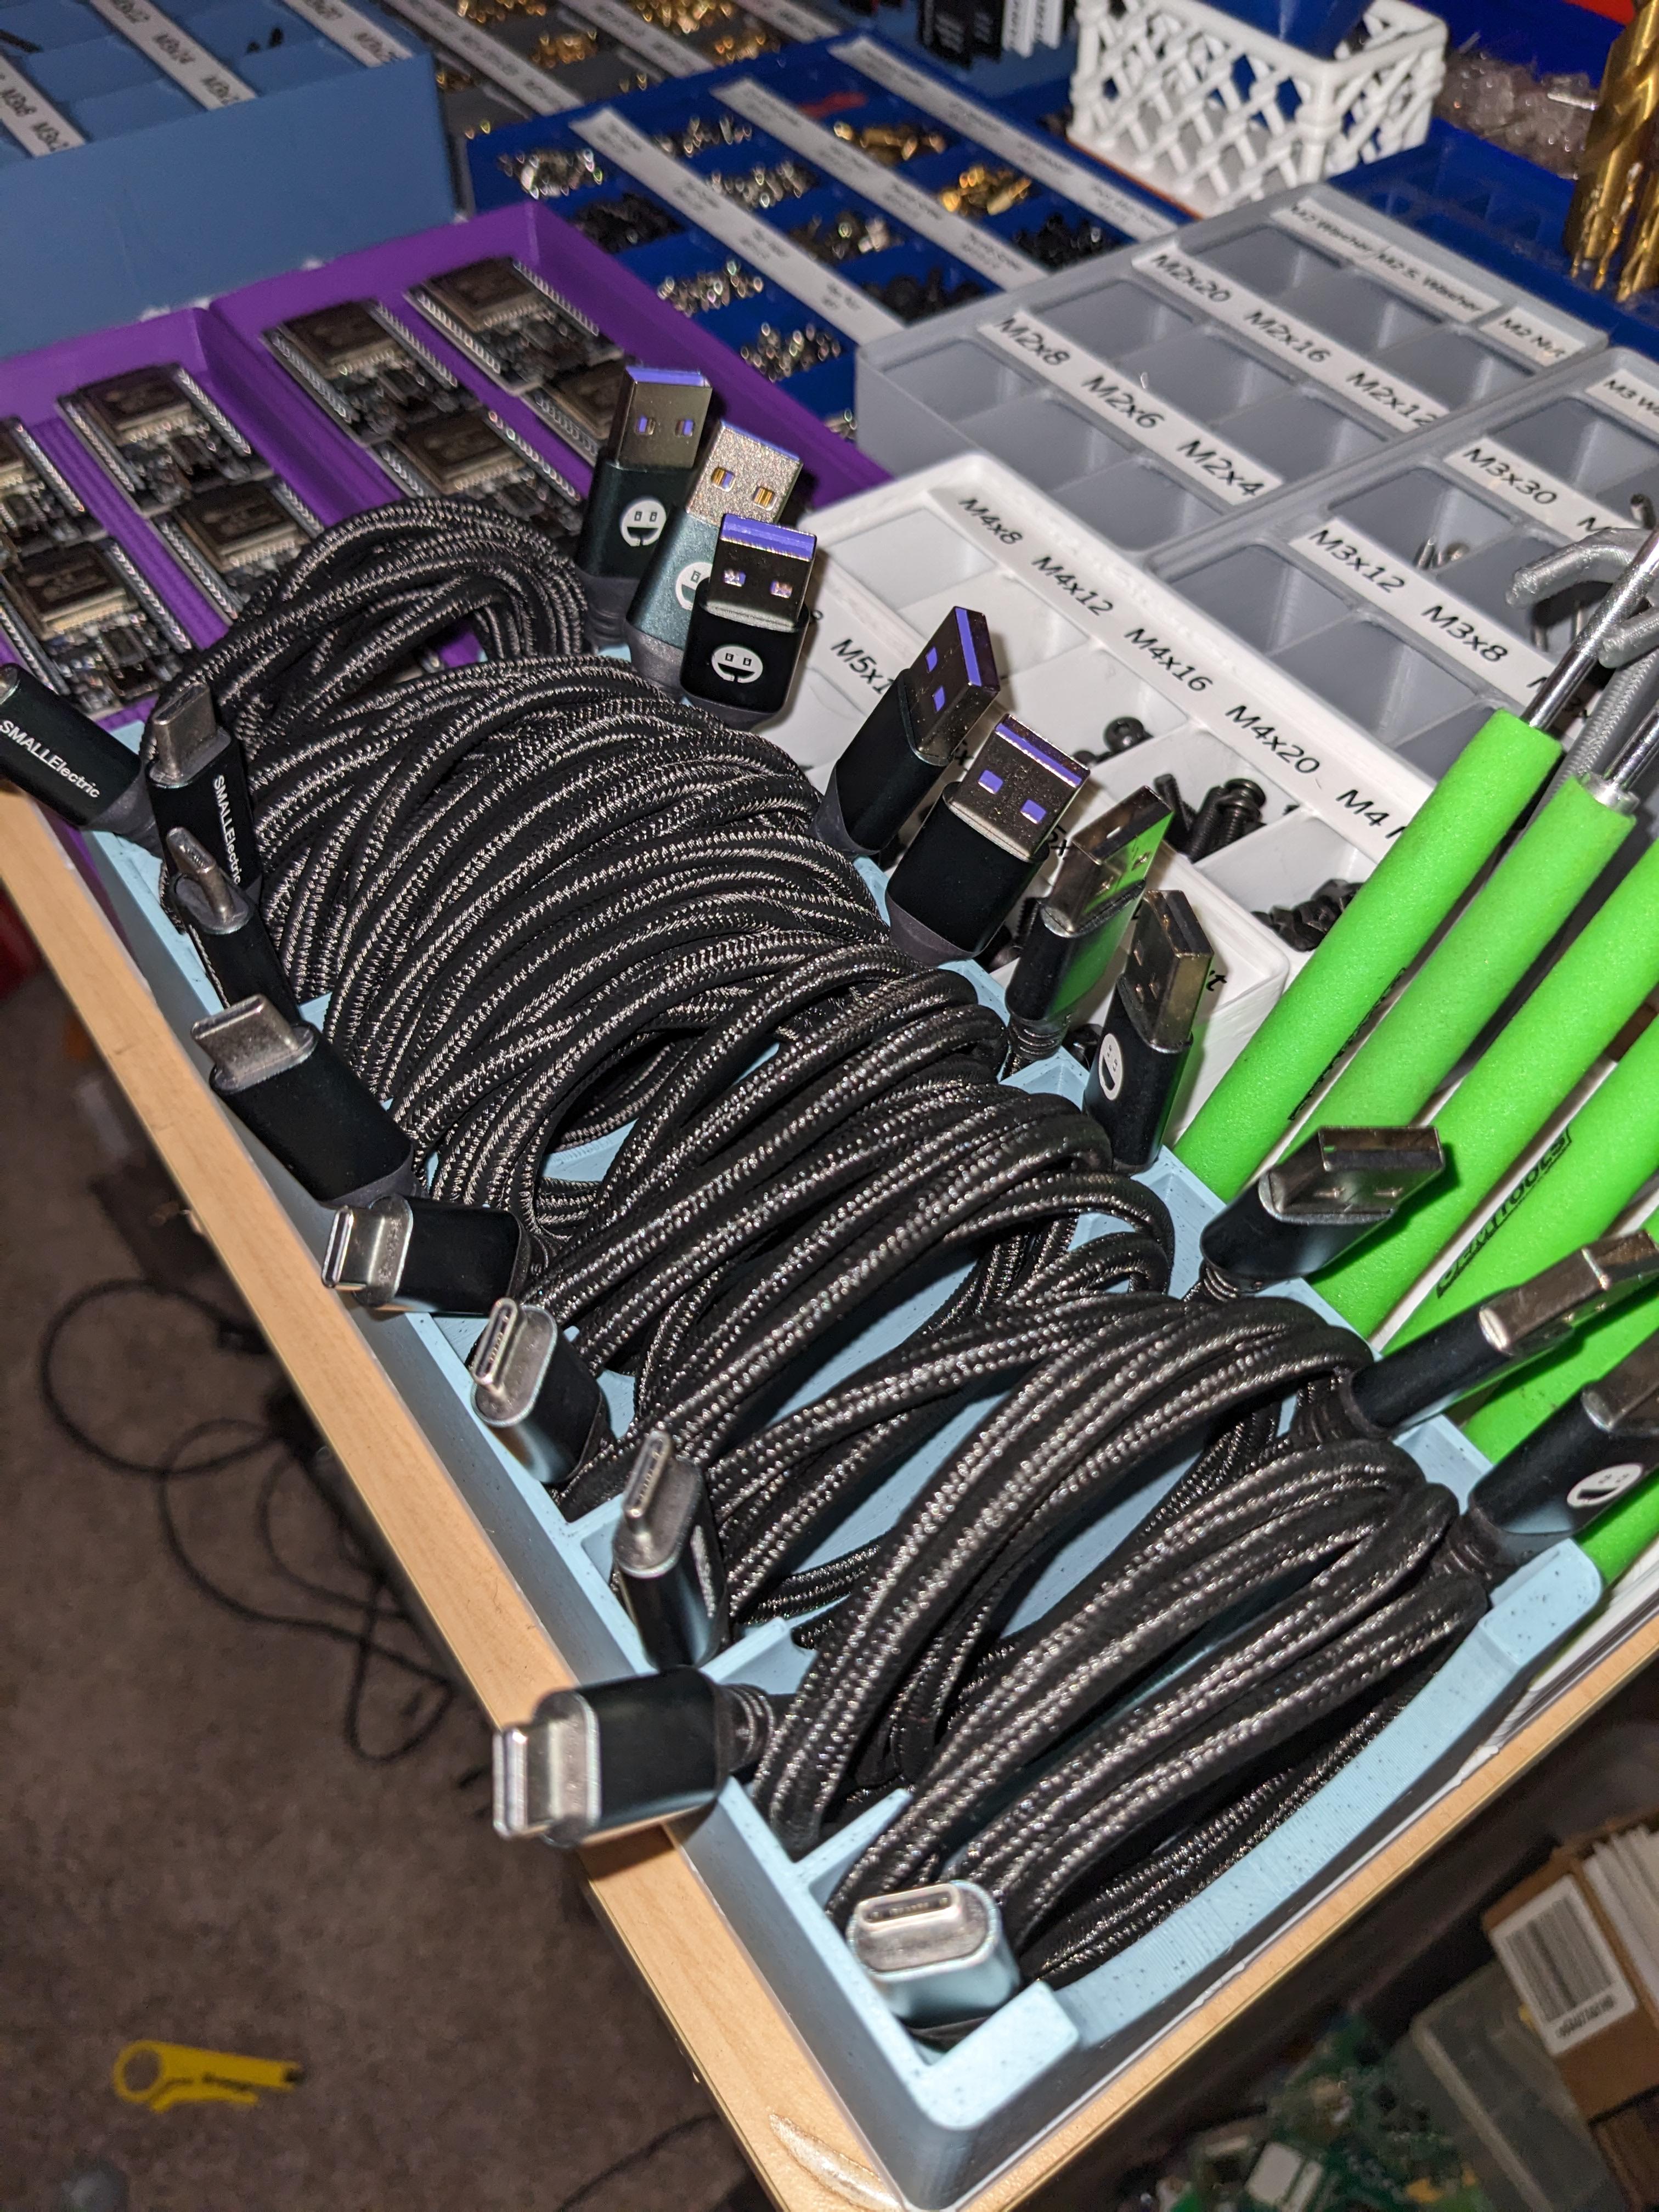 USB Cable organizer storage bin - Gridfinity - Works great! Versions with wider slots may be nice for larger cables, but this fits these 6' USB C cables in without too much issue, just a bit tight. - 3d model